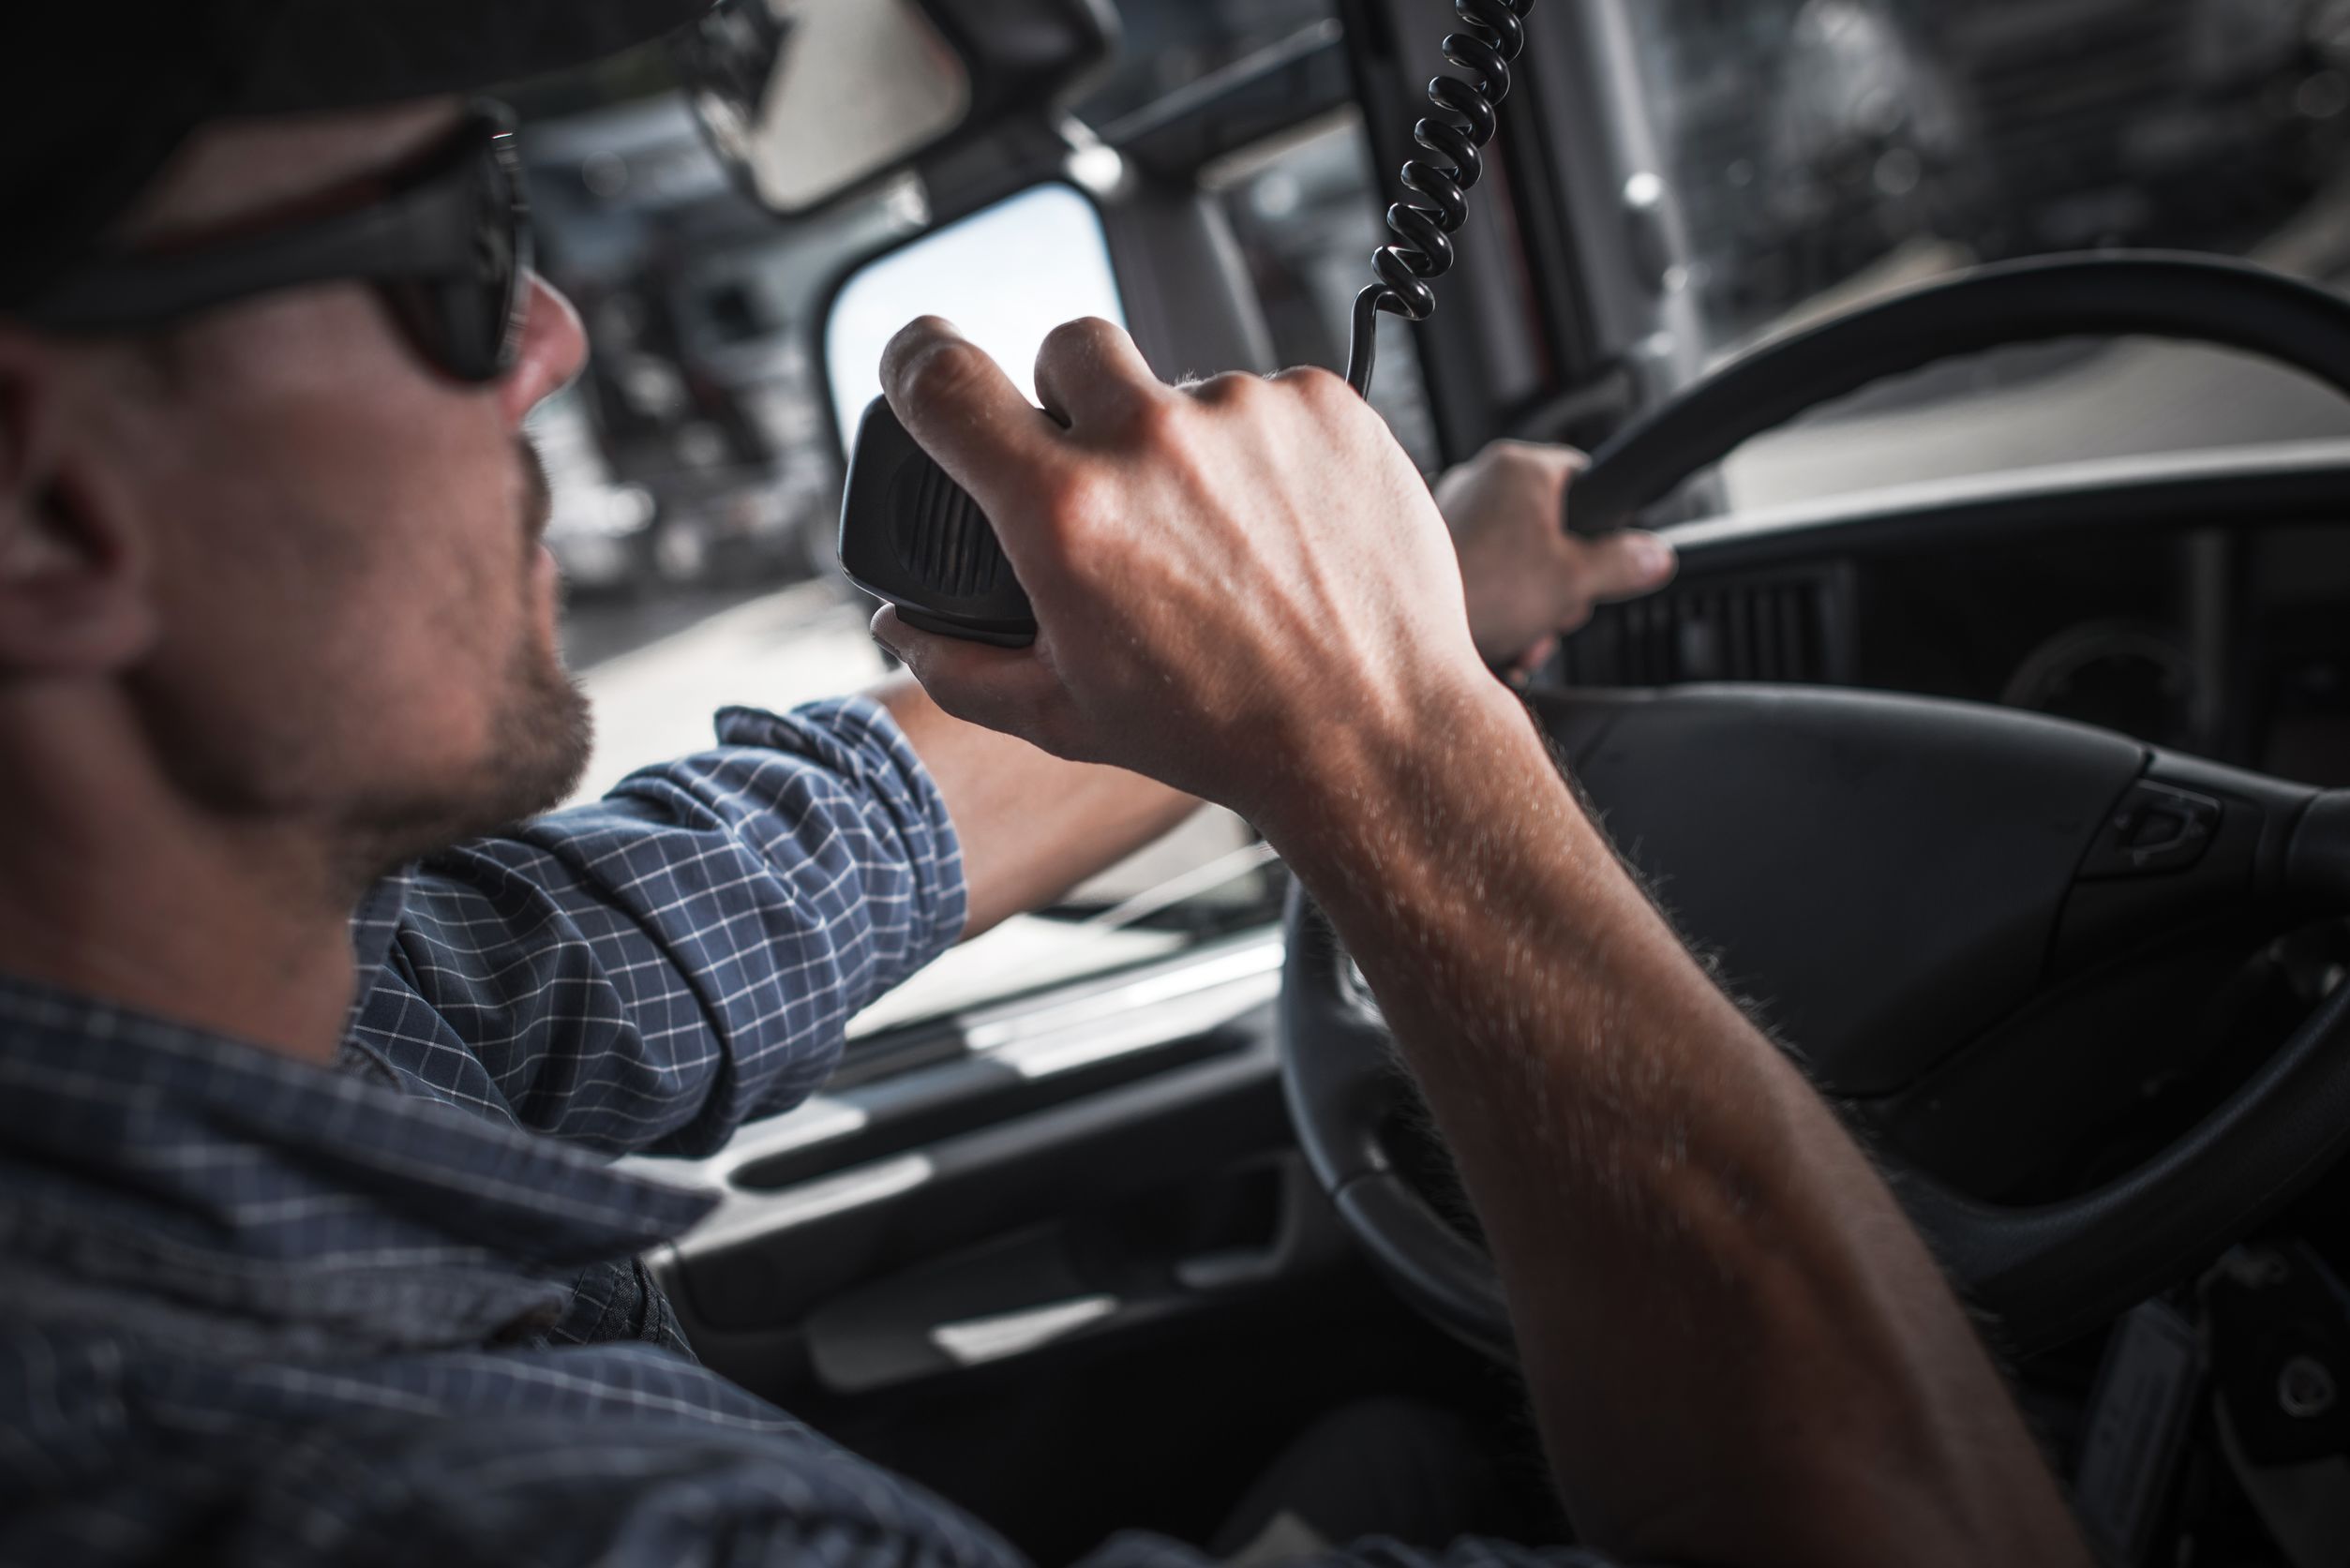 We Have the Best ELD For Truck Drivers: Here’s Why